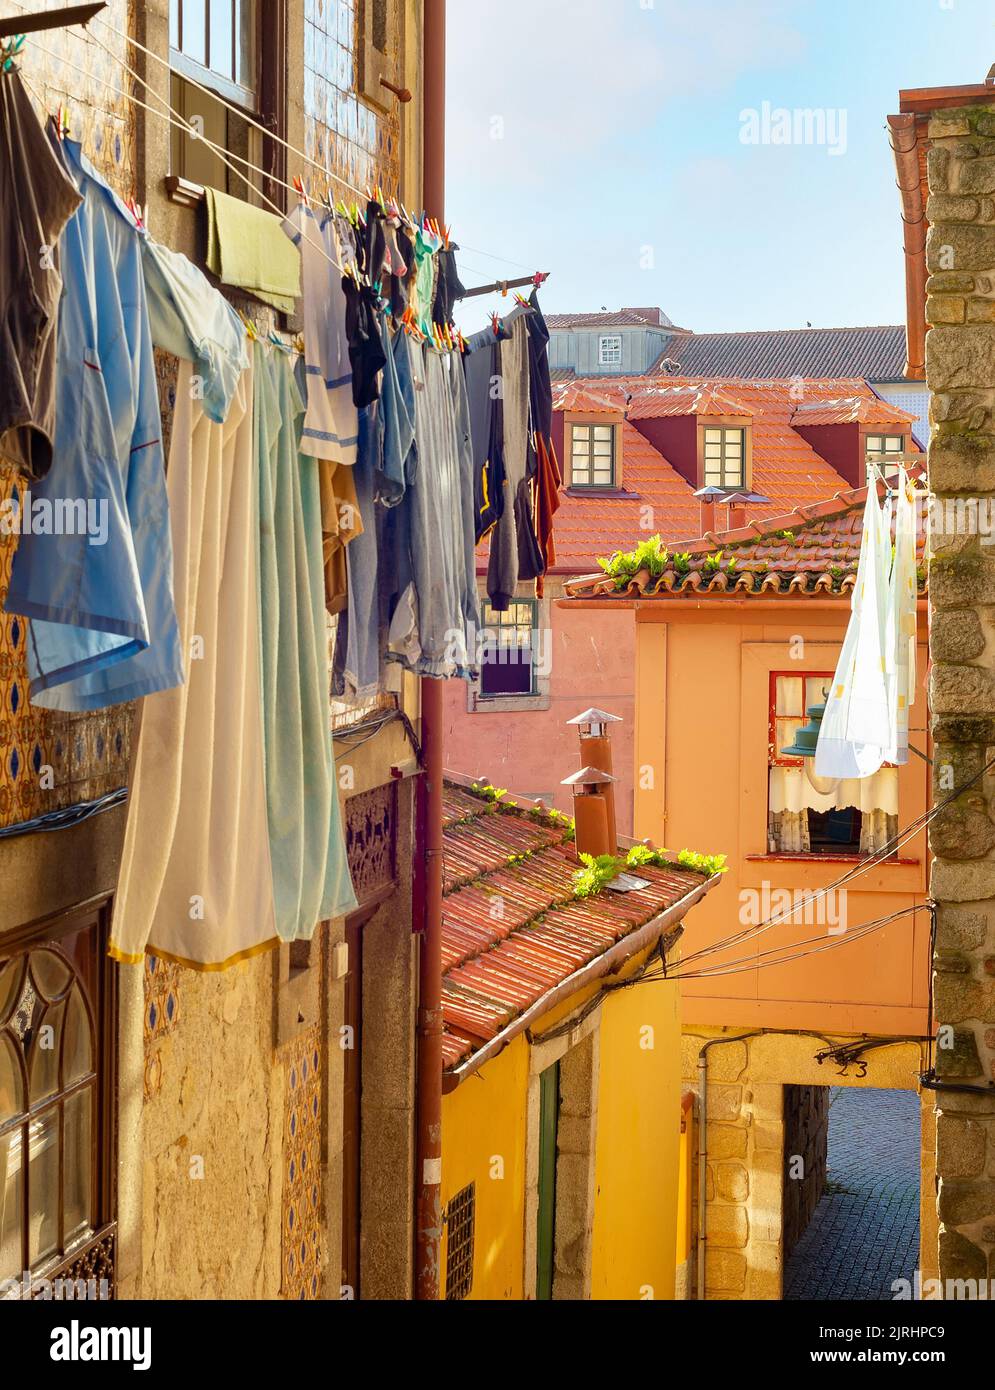 Clothes drying on line, traditional old town street view, colorful houses, Porto, Portugal Stock Photo